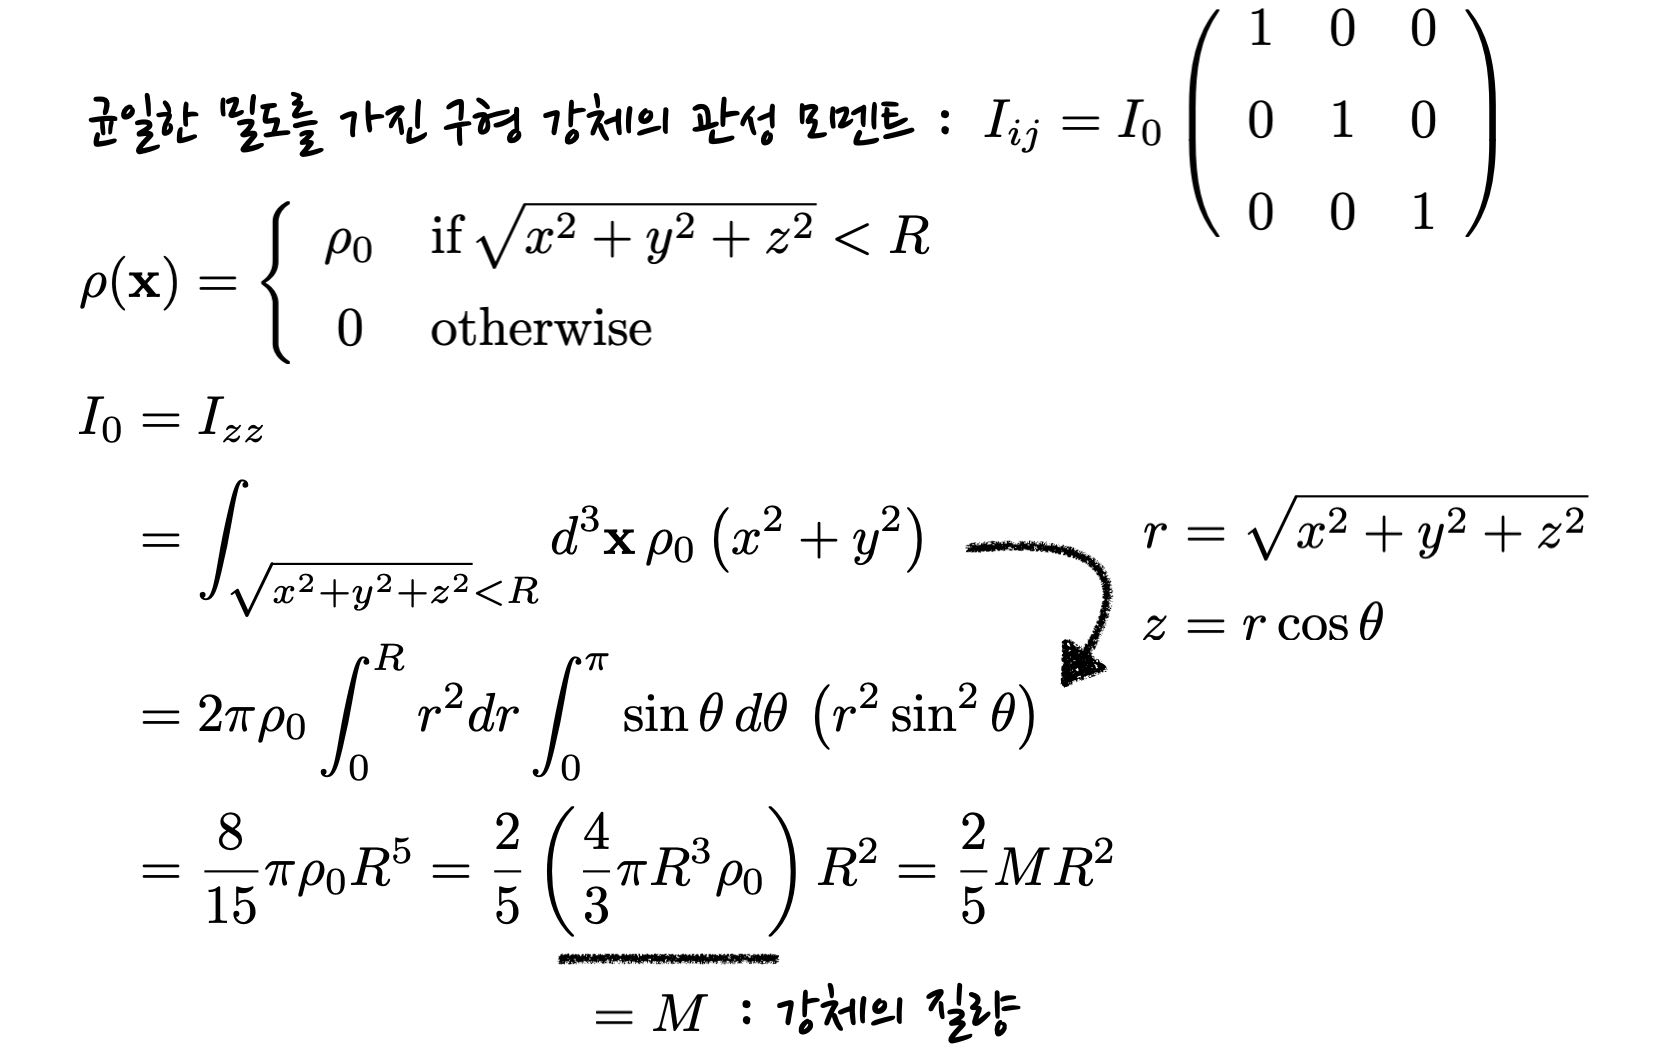 formulae for moment of inertia of a spherical rigid body with constant density. It is demonstrated that the moment of inertia has the form of constant multiplied by a unit matrix.